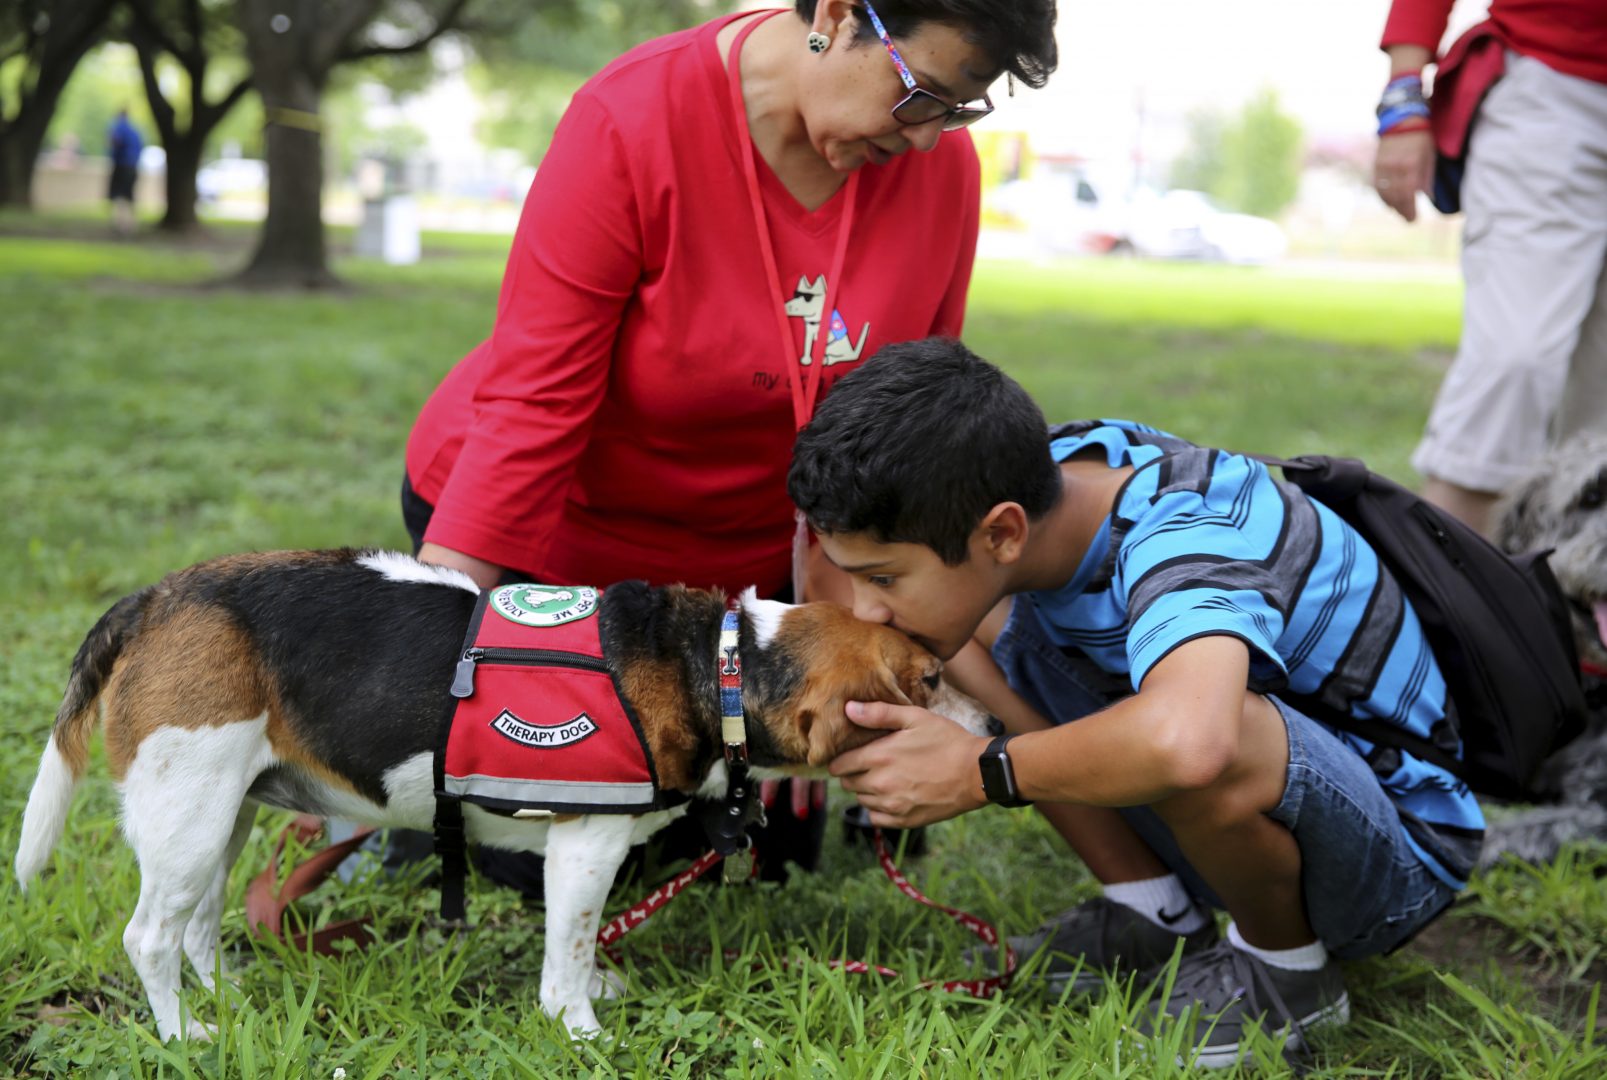 FILE PHOTO: Sammy Garza, right, kisses a therapy dog, Molly, while mother, Del Garza, looks on in downtown Dallas on Friday, July 7, 2017.